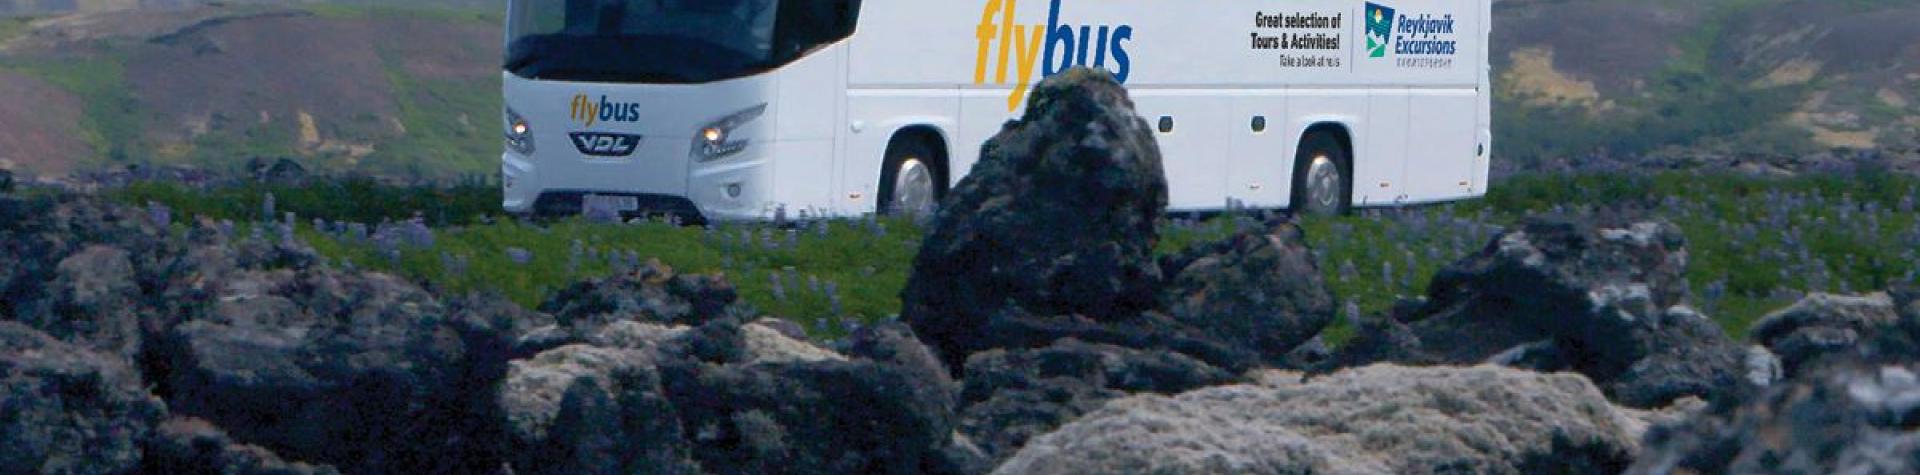 Flybus - BSI to Airport